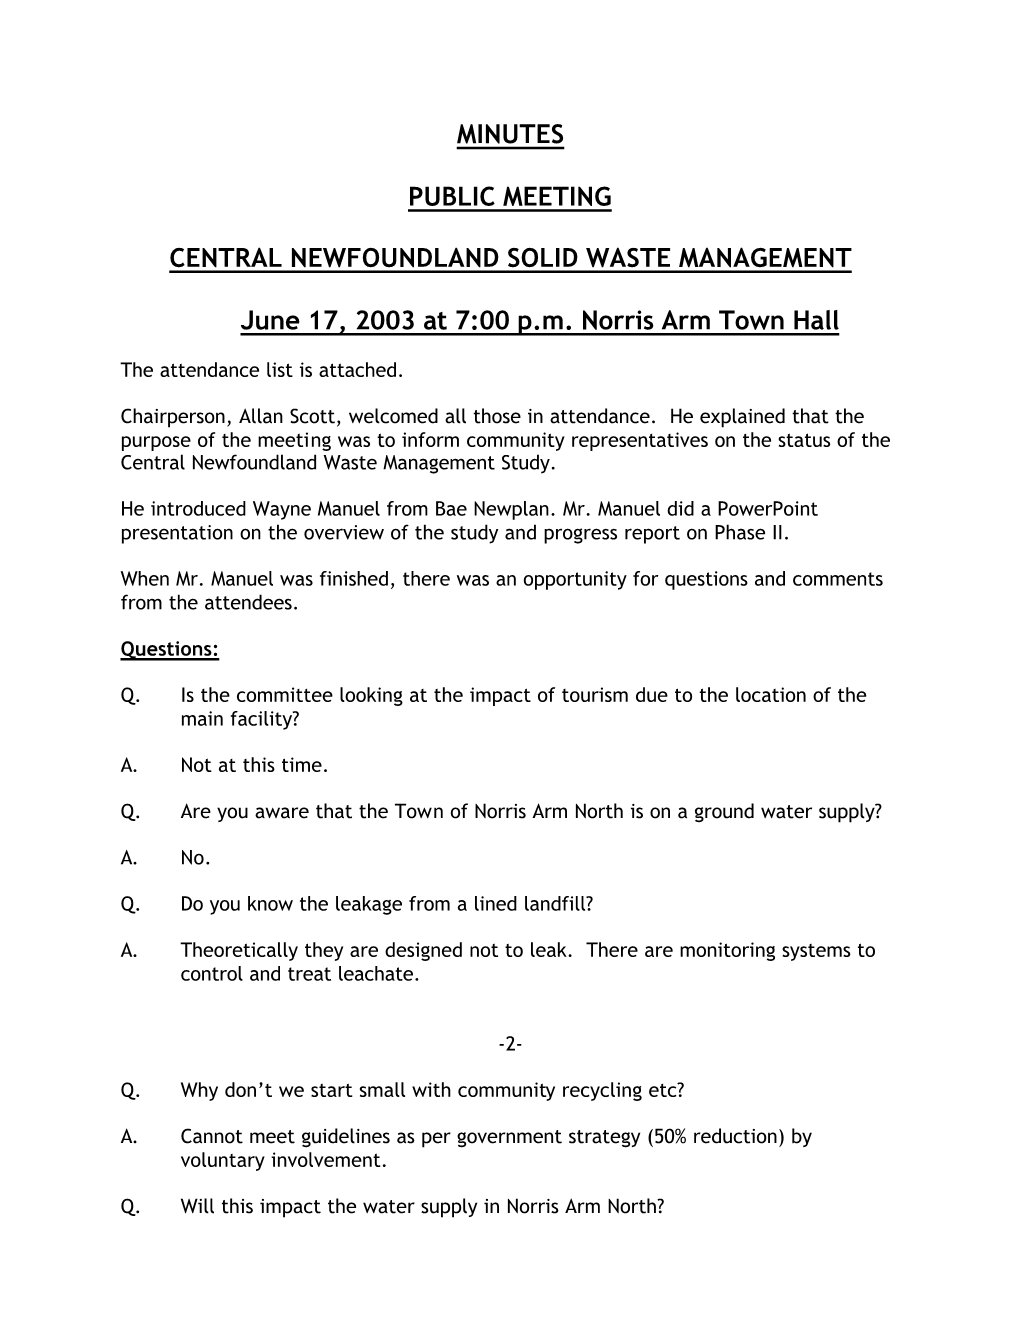 Minutes Public Meeting Central Newfoundland